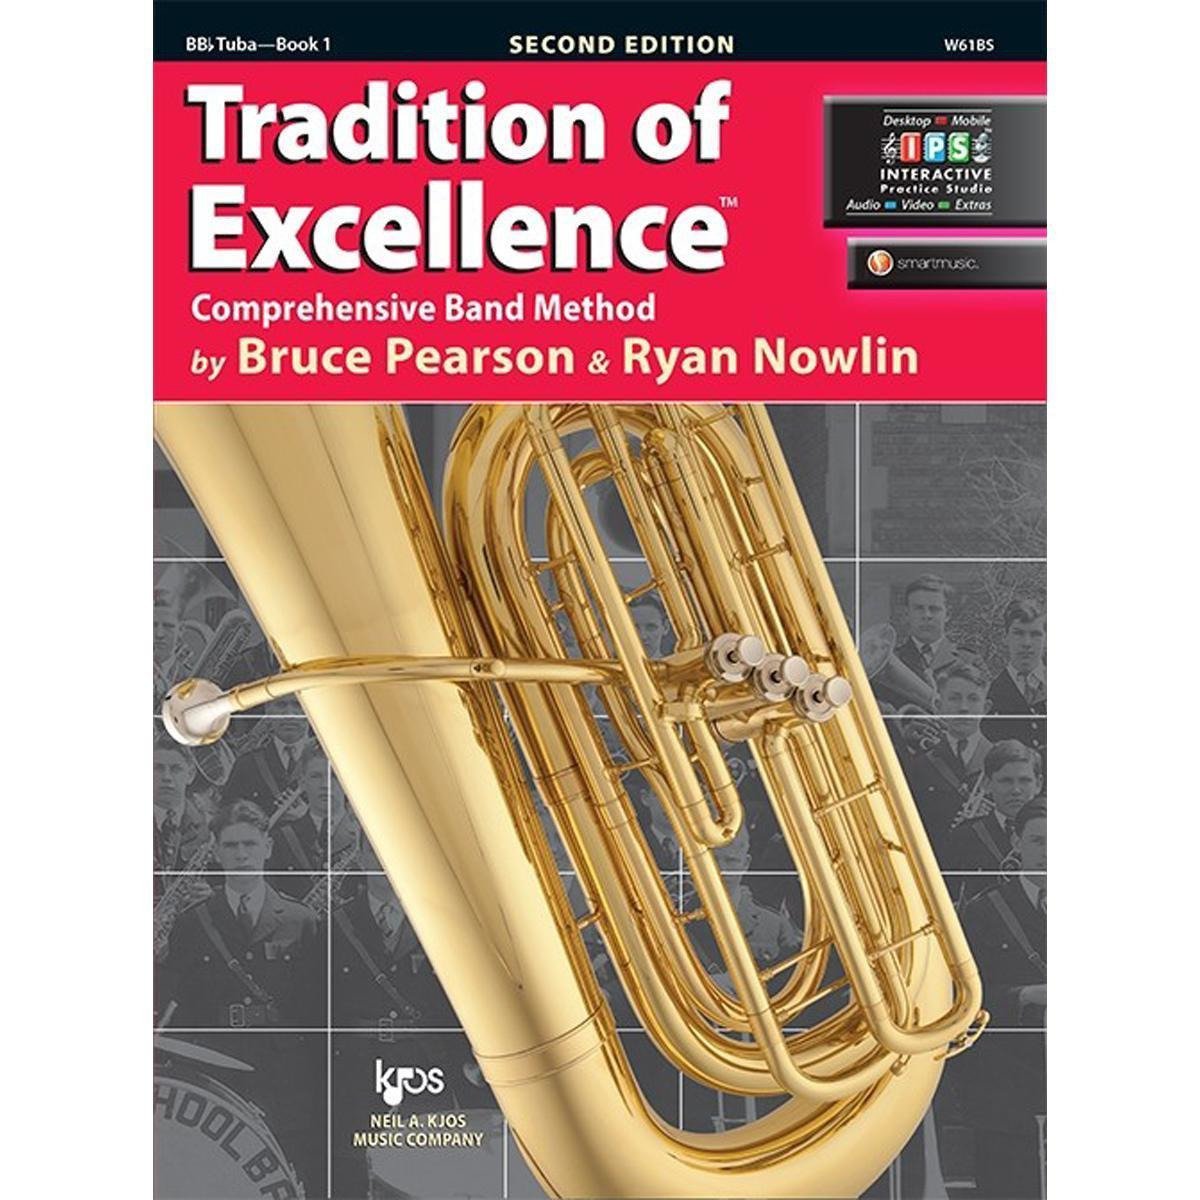 Tradition of Excellence Book 1-BBb Tuba-Andy's Music